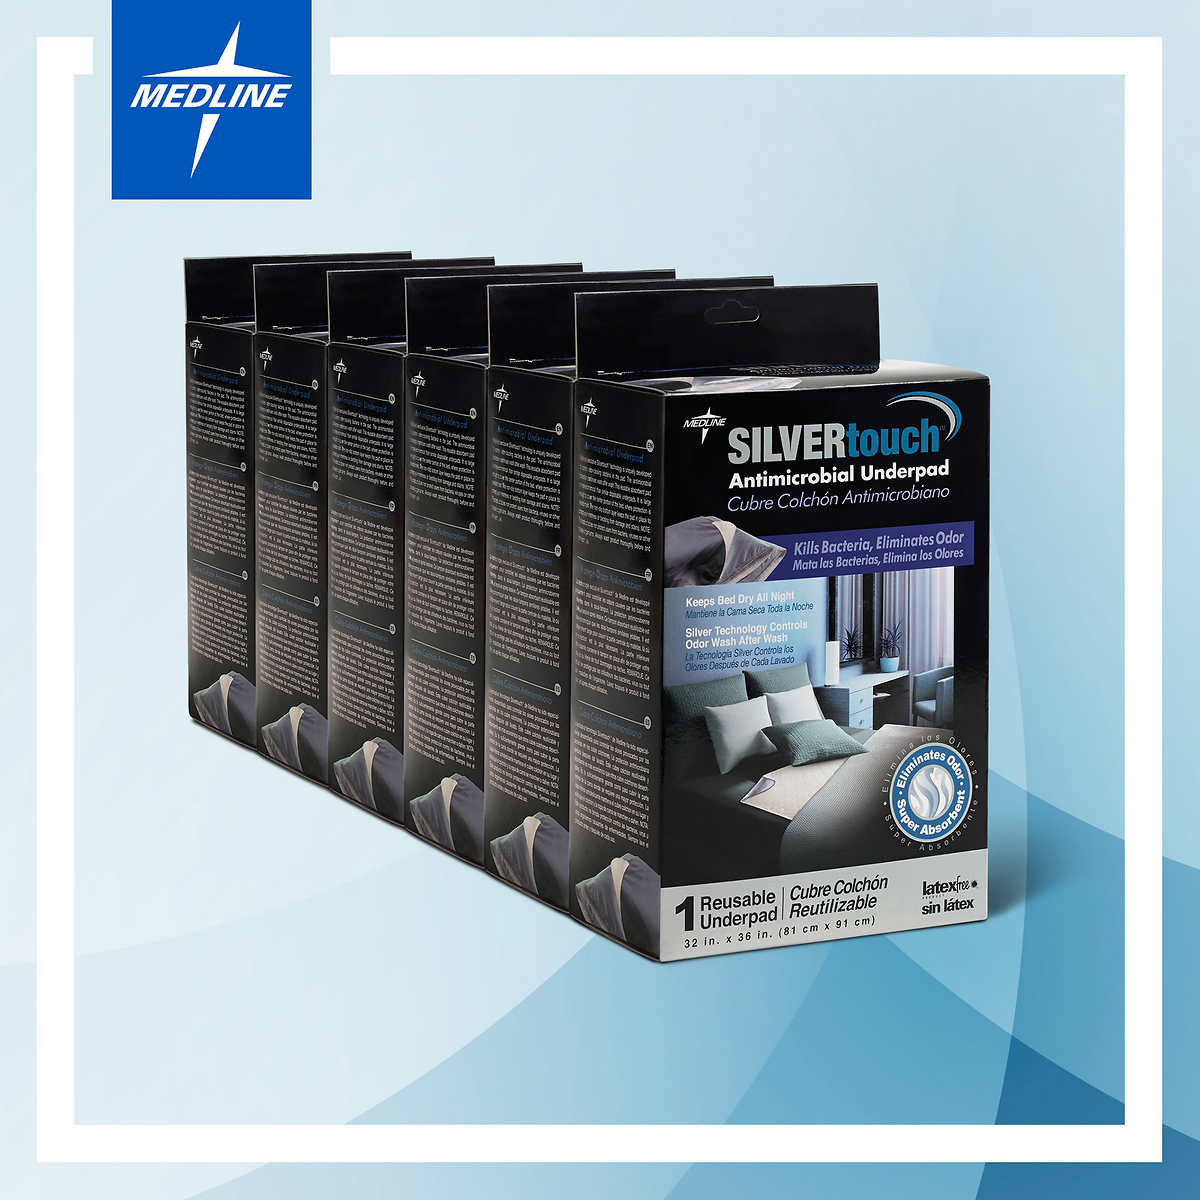 Medline Silvertouch Antimicrobial Underpad, 6-pack